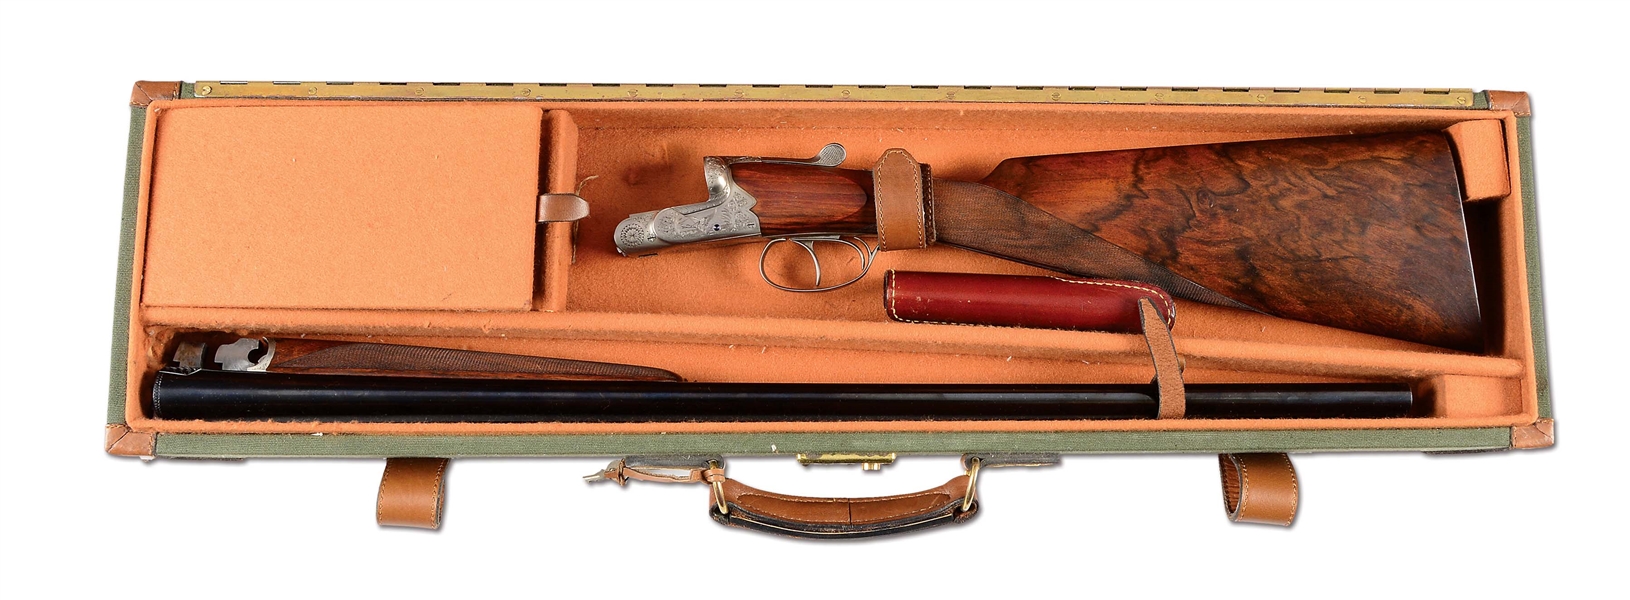 (M) FINE QUALITY 20 GAUGE BOXLOCK EJECTOR GAME GUN BY FAURE LE PAGE WITH CASE.